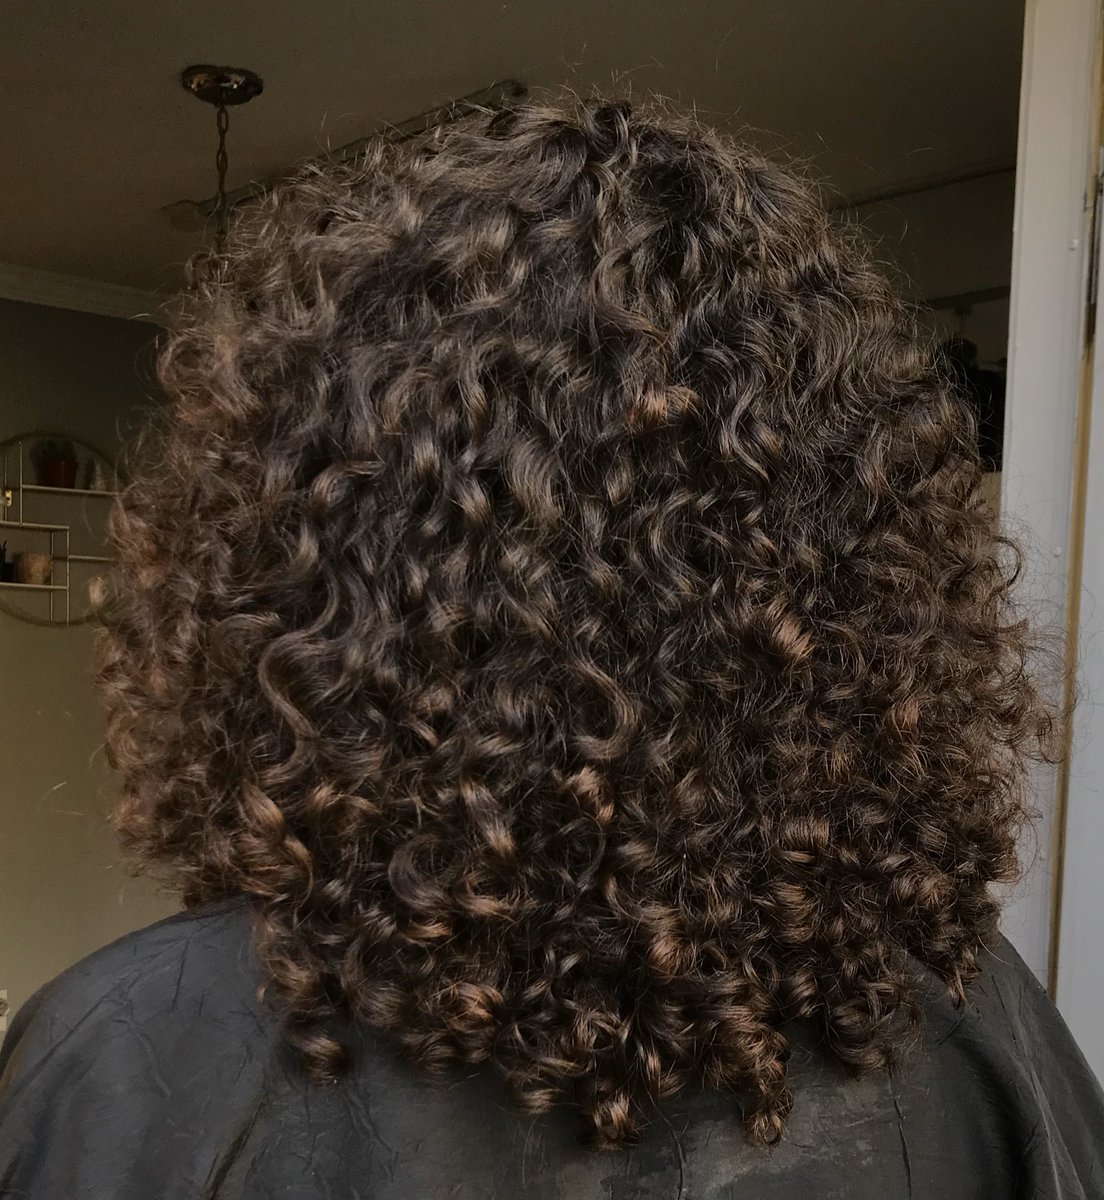 SHAPE!! We didn’t take off much length but adjusting the shape made ALL the difference. Shape is the most important thing when choosing a curly haircut